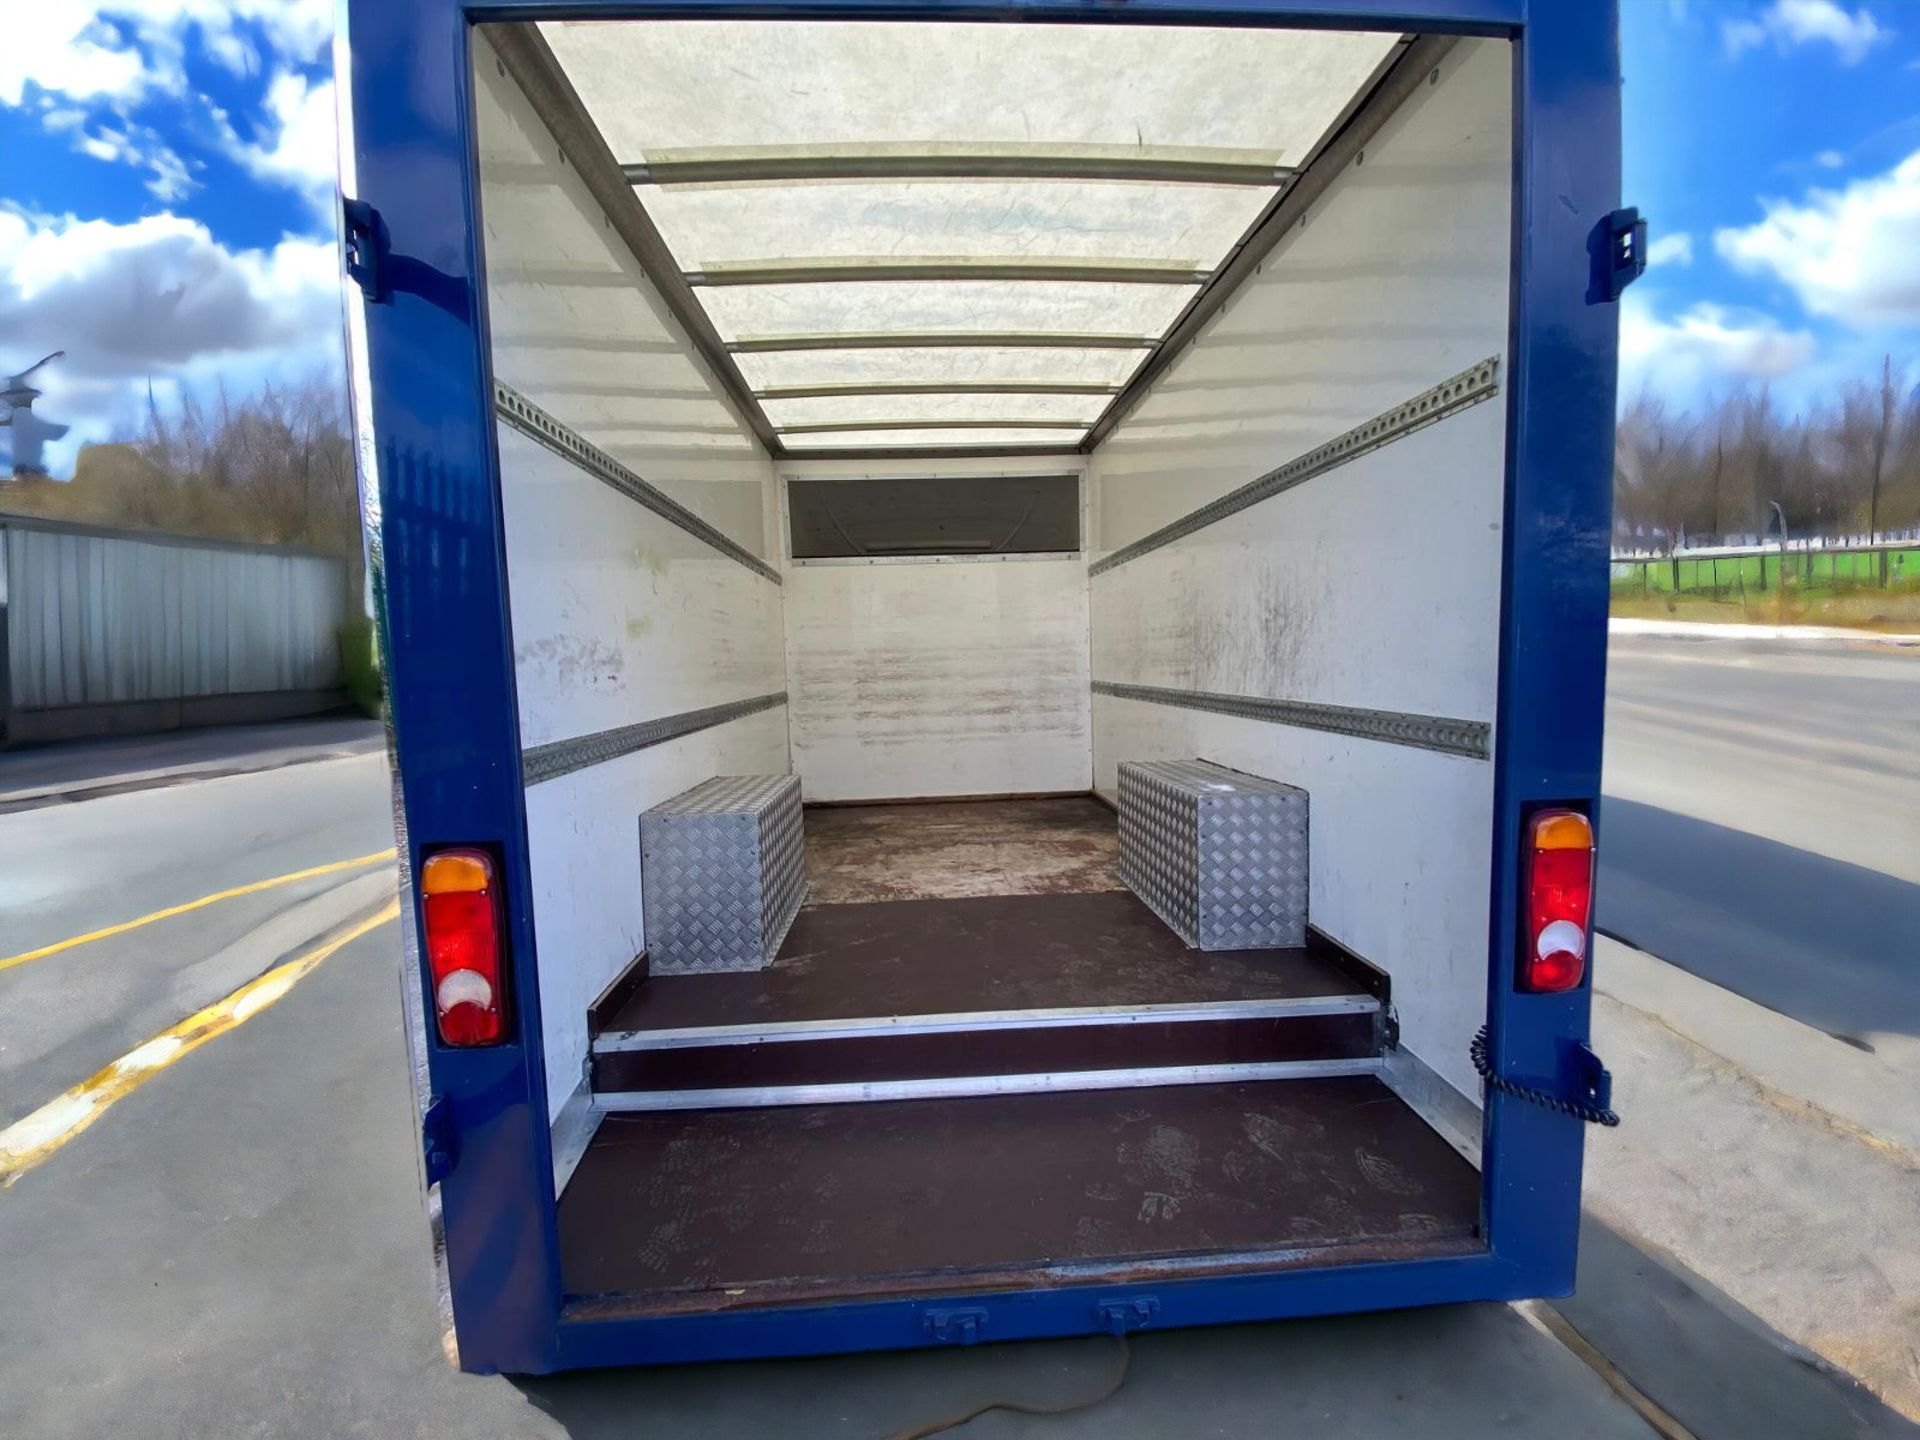 2014 PEUGEOT BOXER 2.2 DROPWELL MAXI LOLOADER LUTON >>--NO VAT ON HAMMER--<< - Image 8 of 14